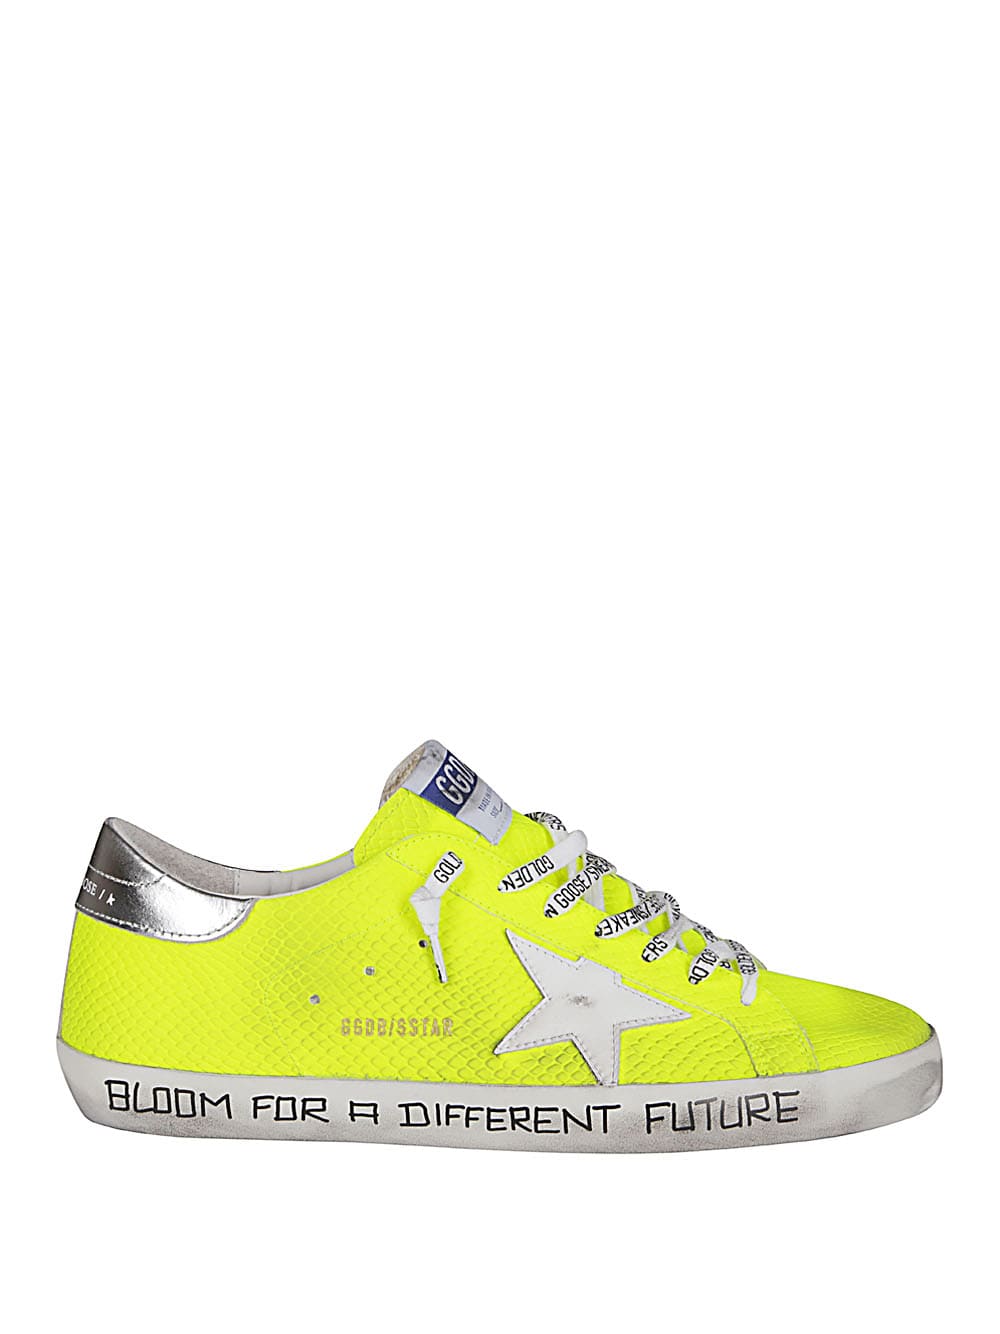 GOLDEN GOOSE FLUORESCENT YELLOW LEATHER SUPER-STAR SNEAKERS,GMF00101.F001239.20257